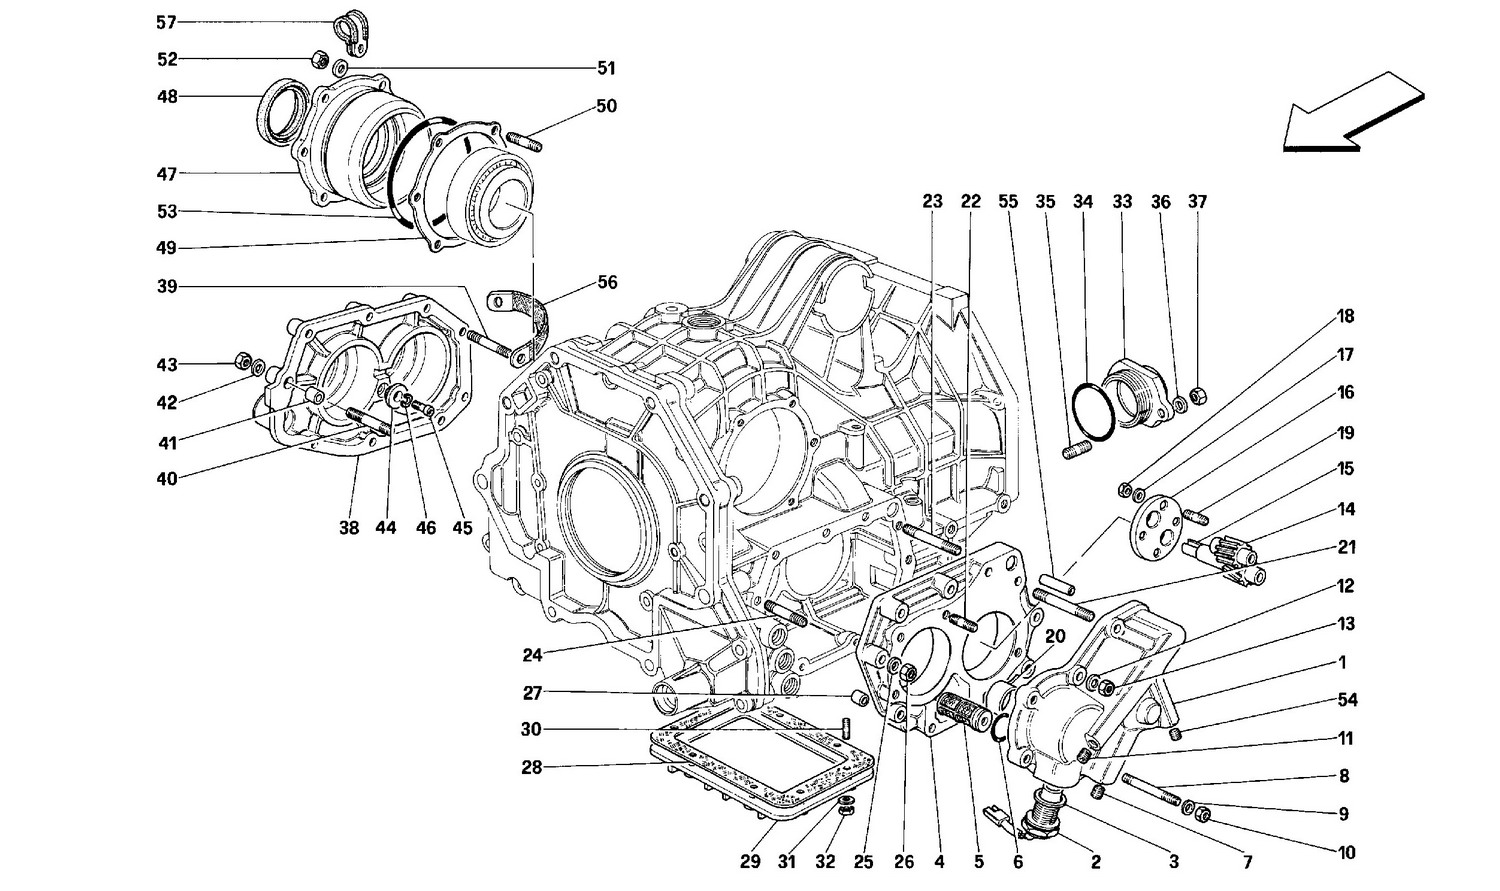 Schematic: Gearbox Covers -Valid For Cars With 3P